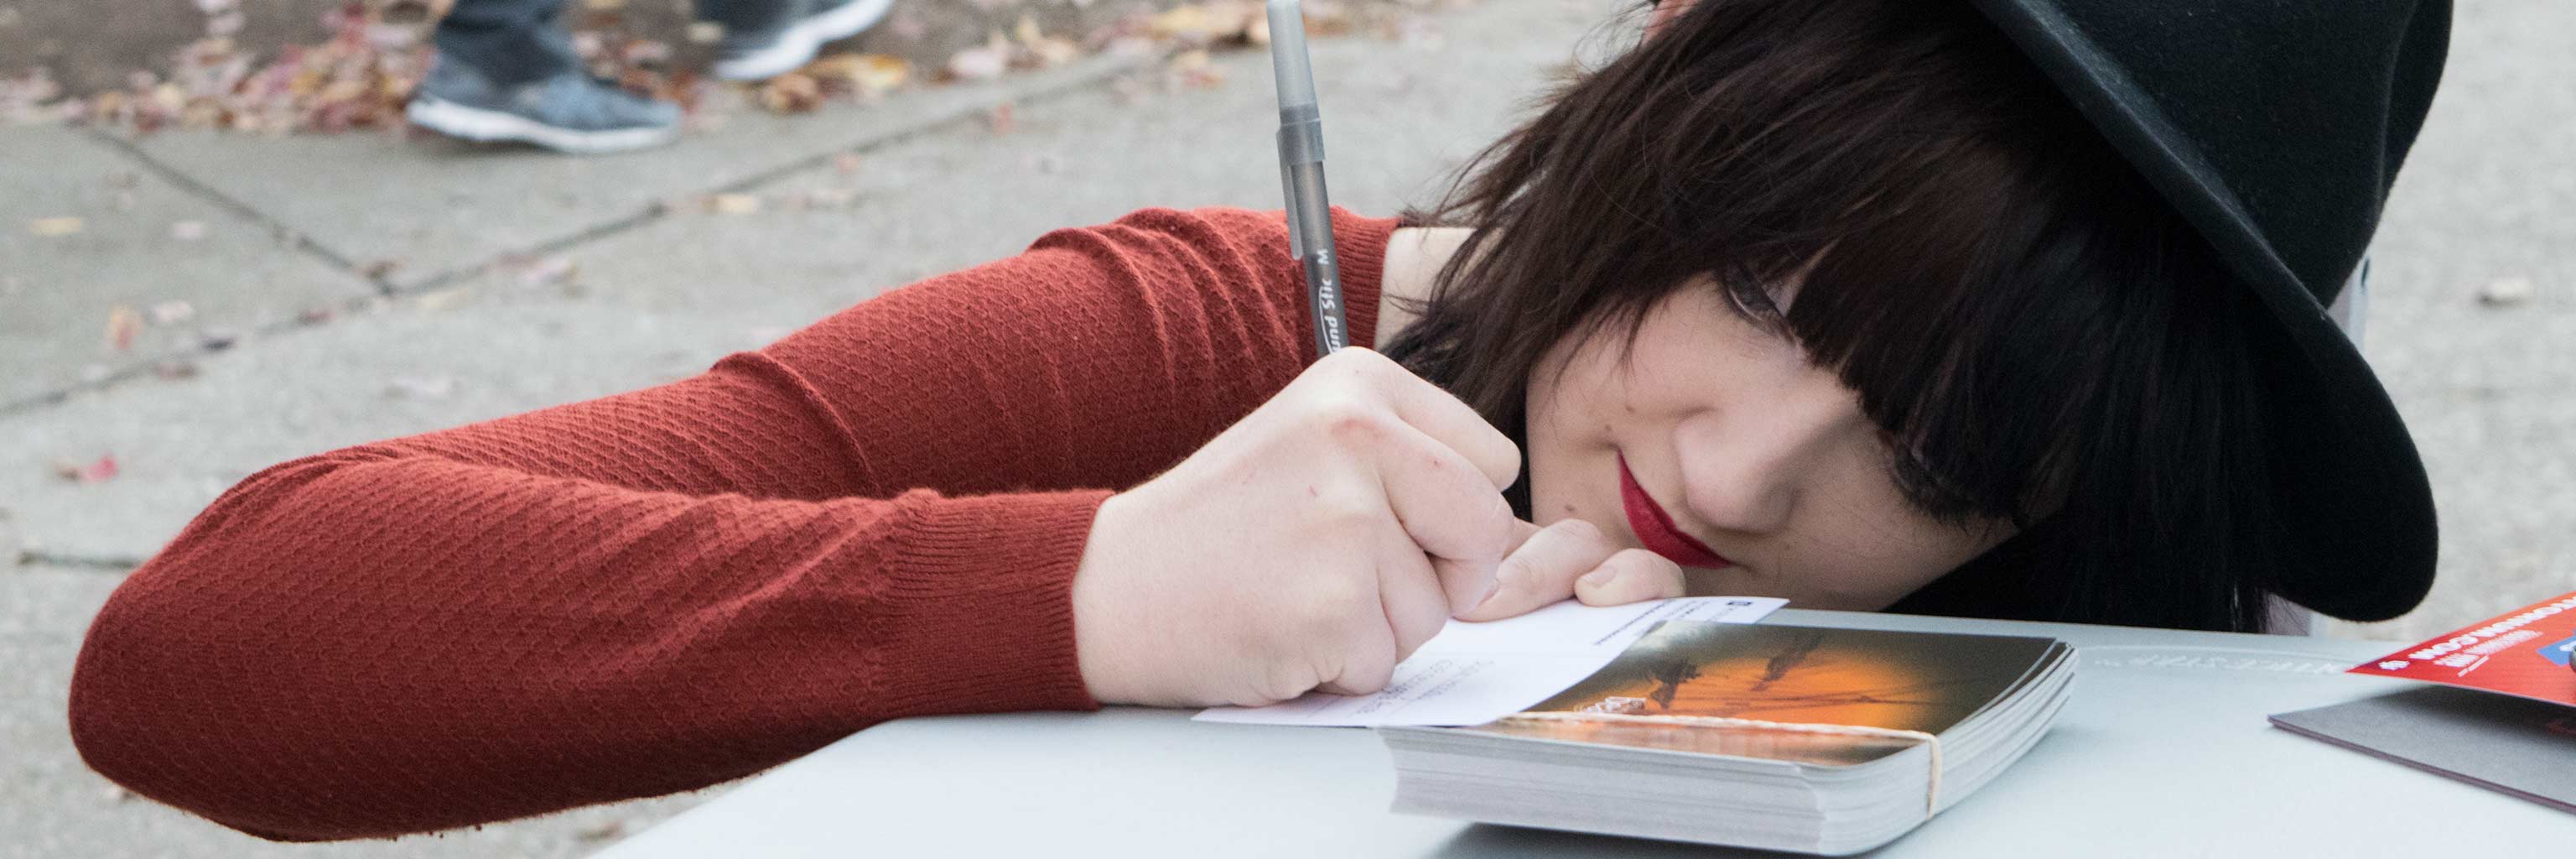 Girl writing on a piece of paper